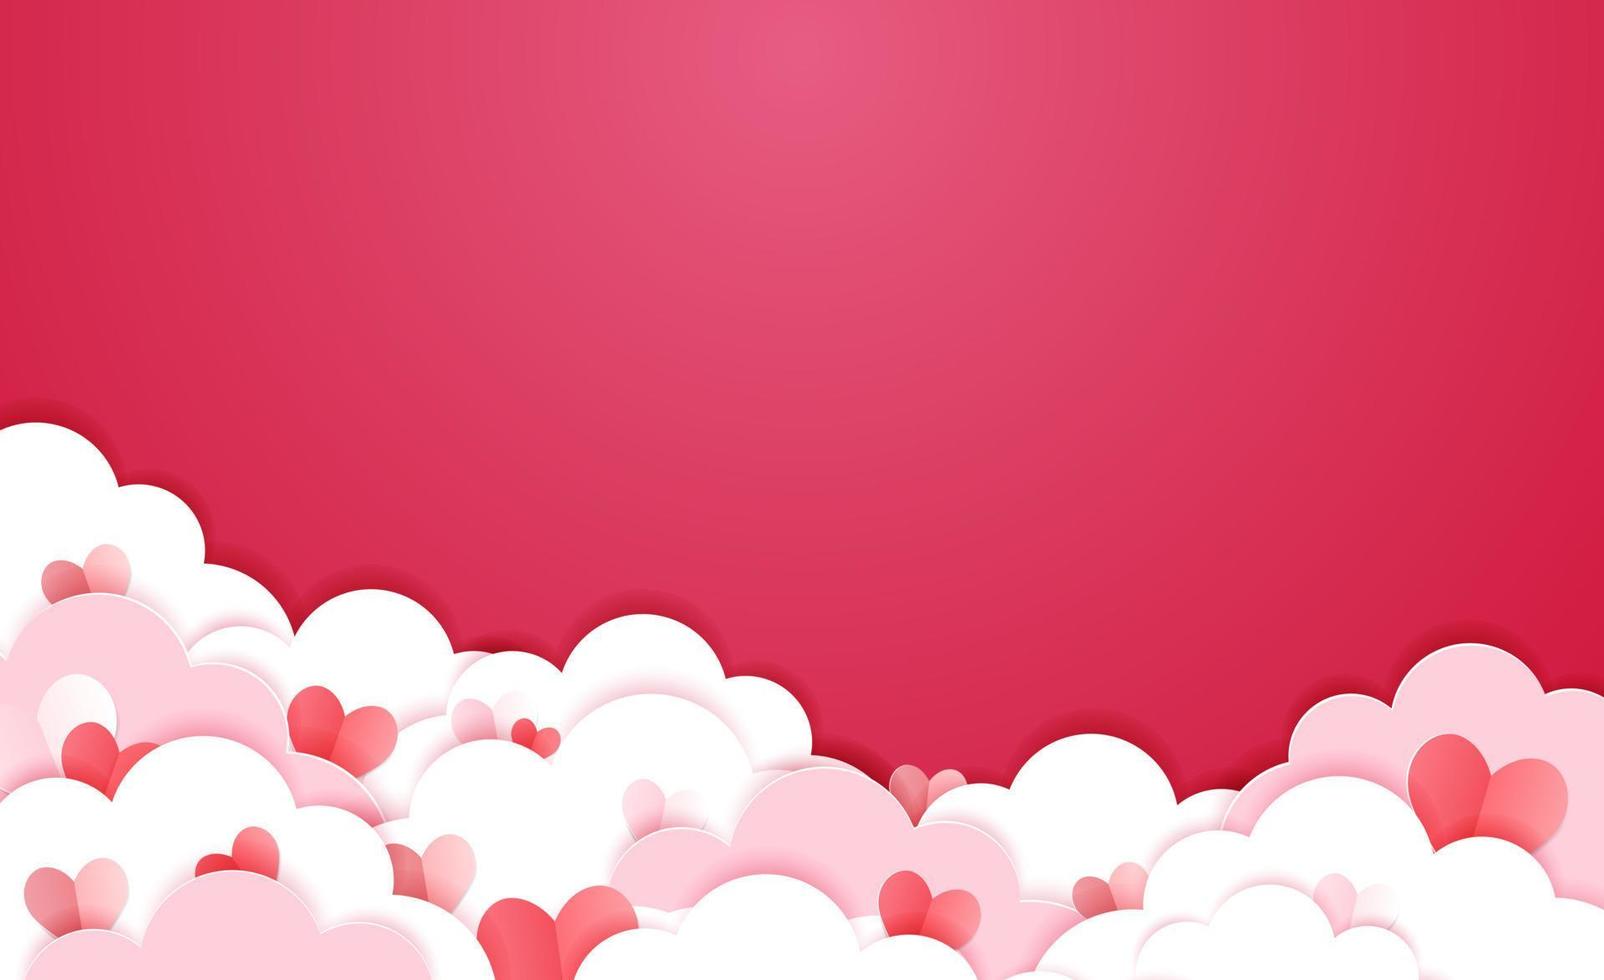 Happy Valentine's day header or voucher template with hearts and clouds. vector